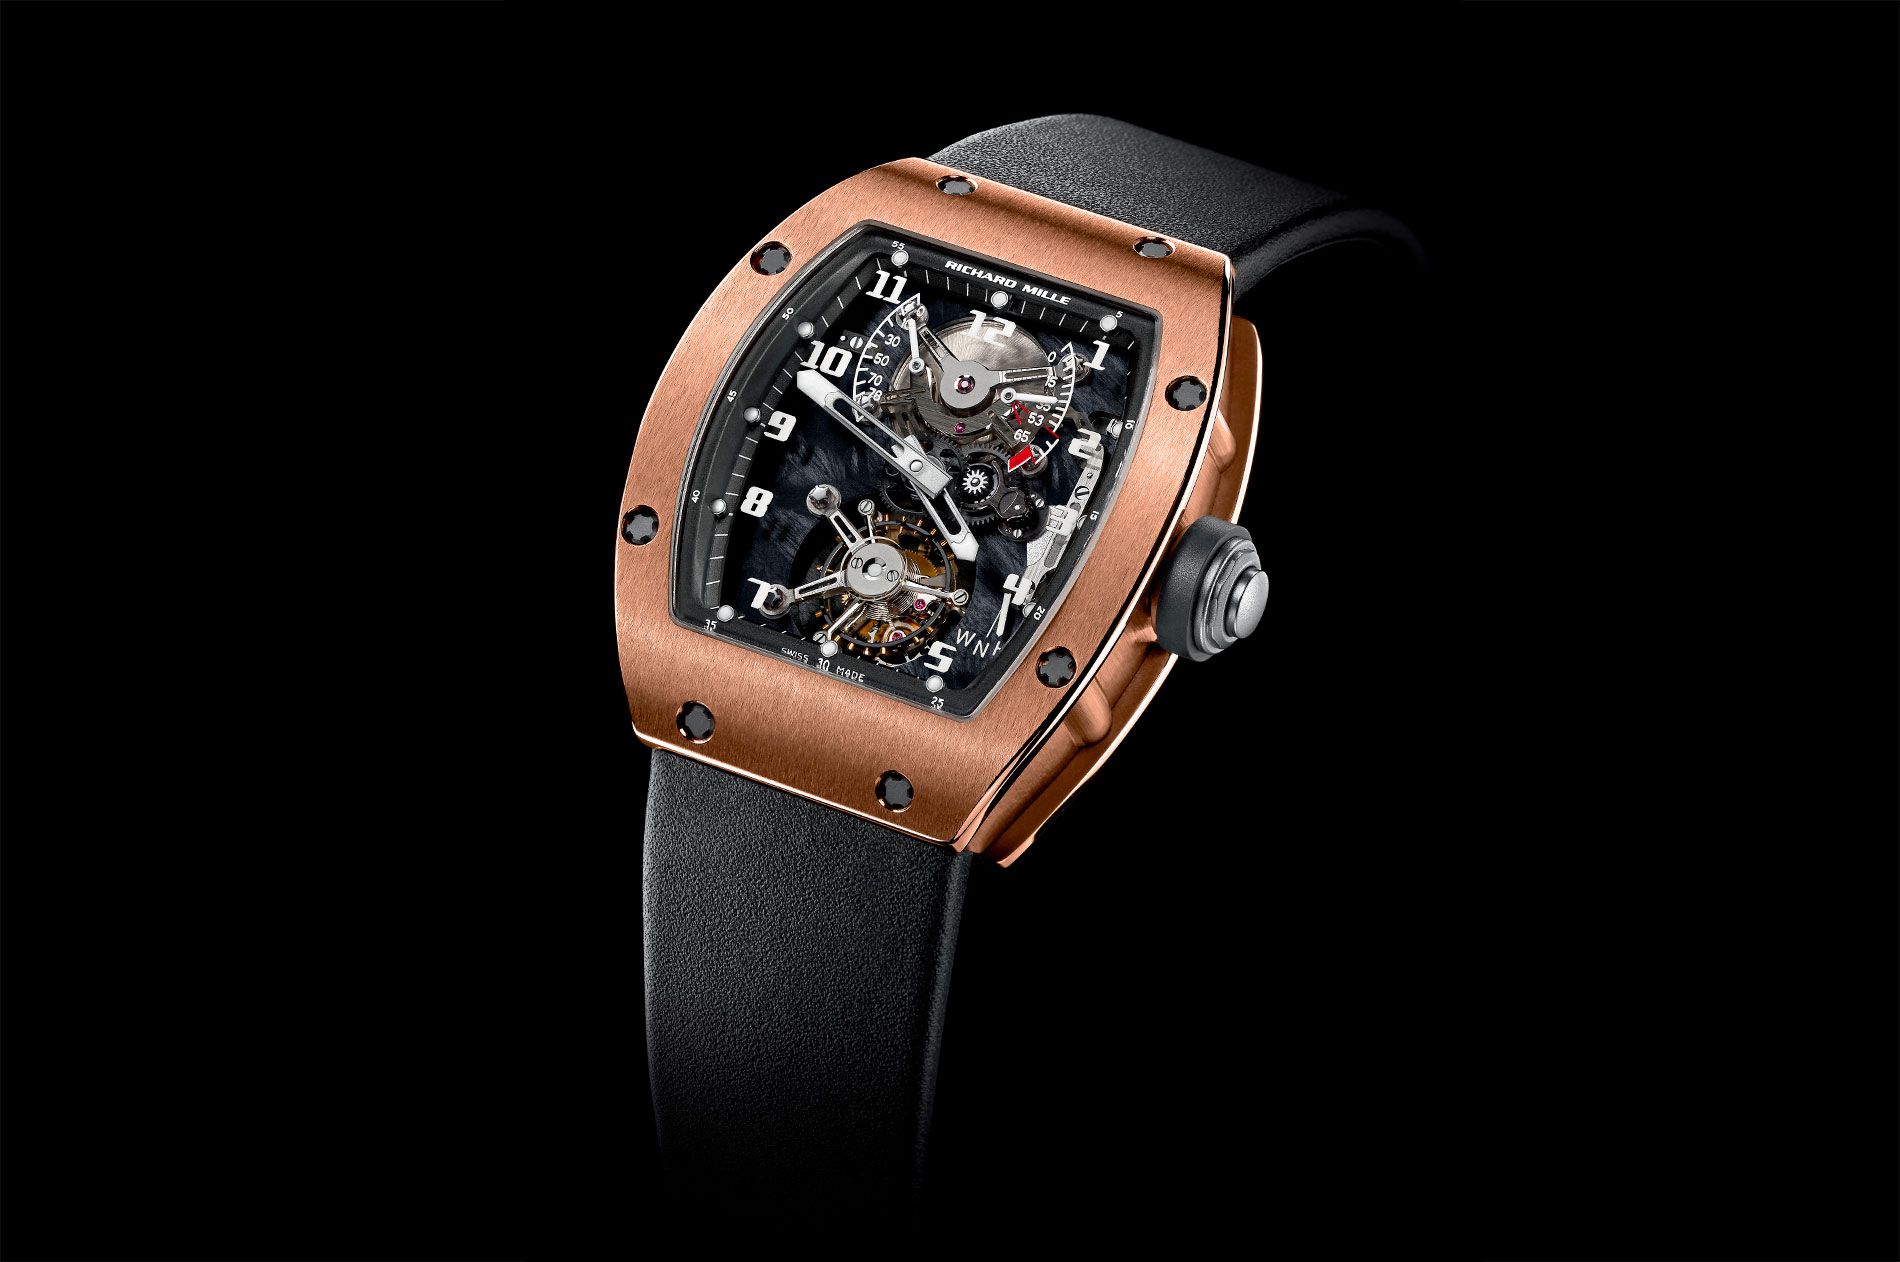 The New Richard Mille Watch For Women